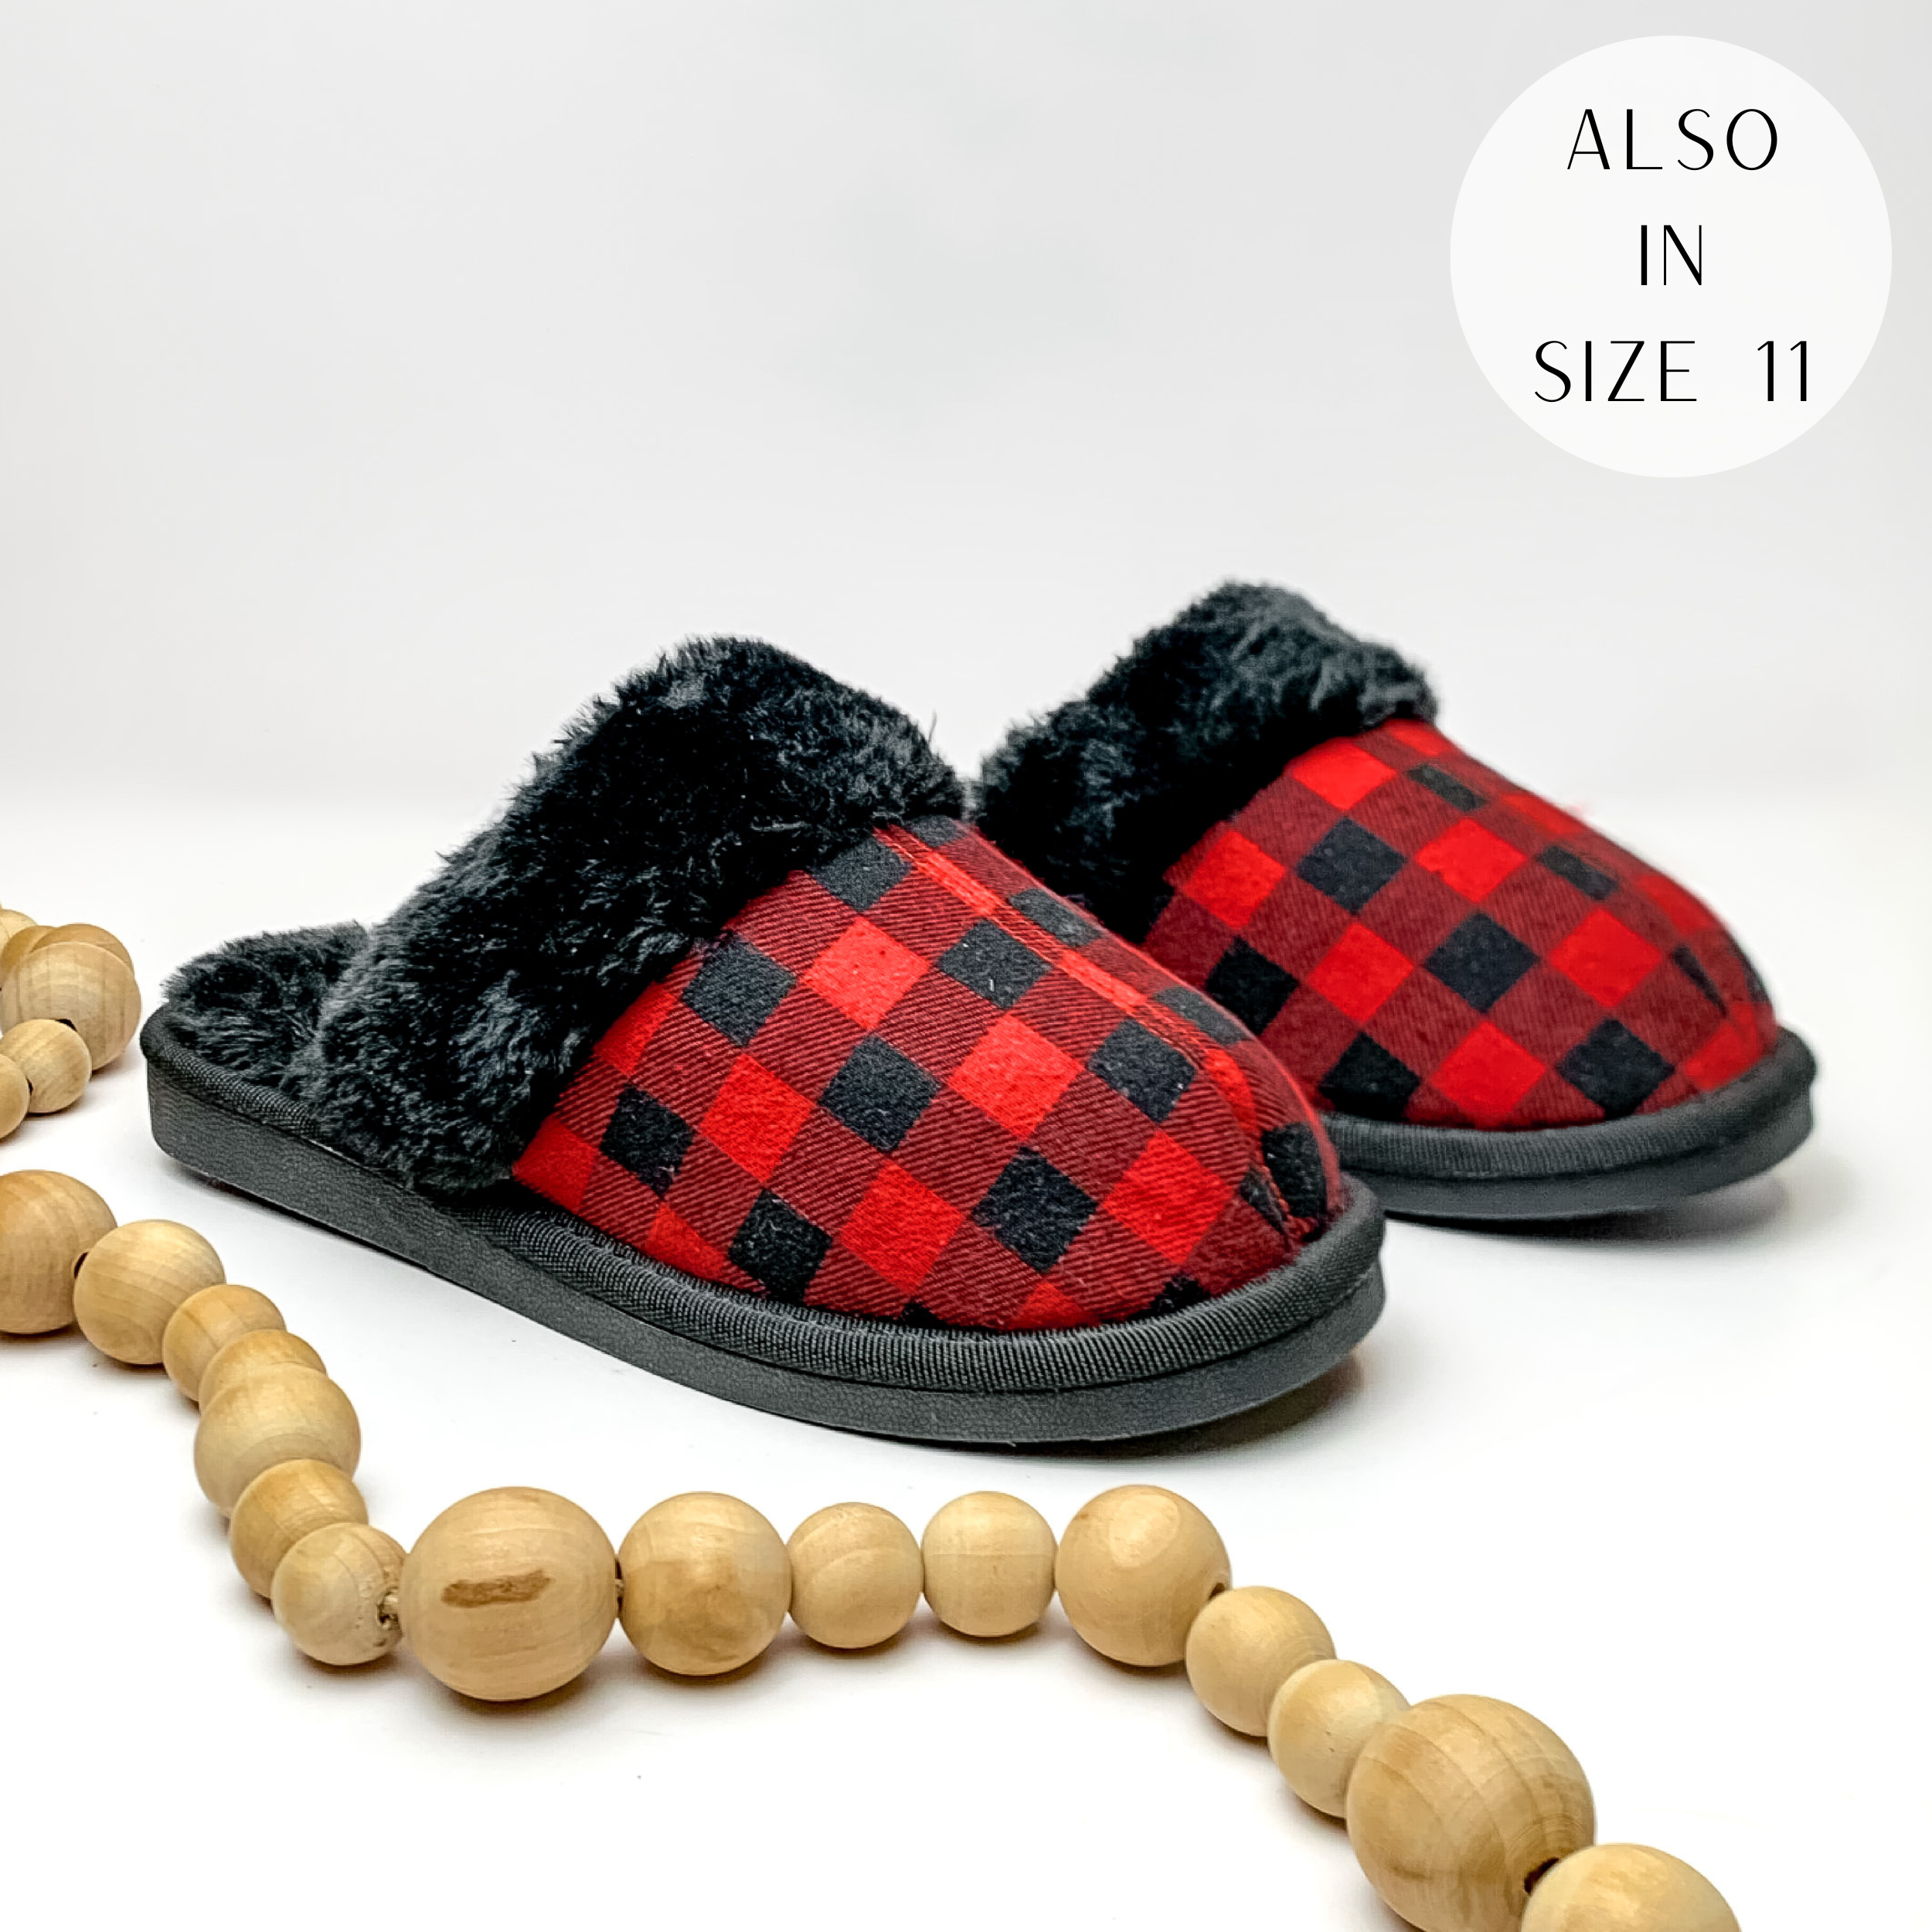 Red plaid slippers with black fur lining and black sole. Pictured on white background with ligh tan beads.